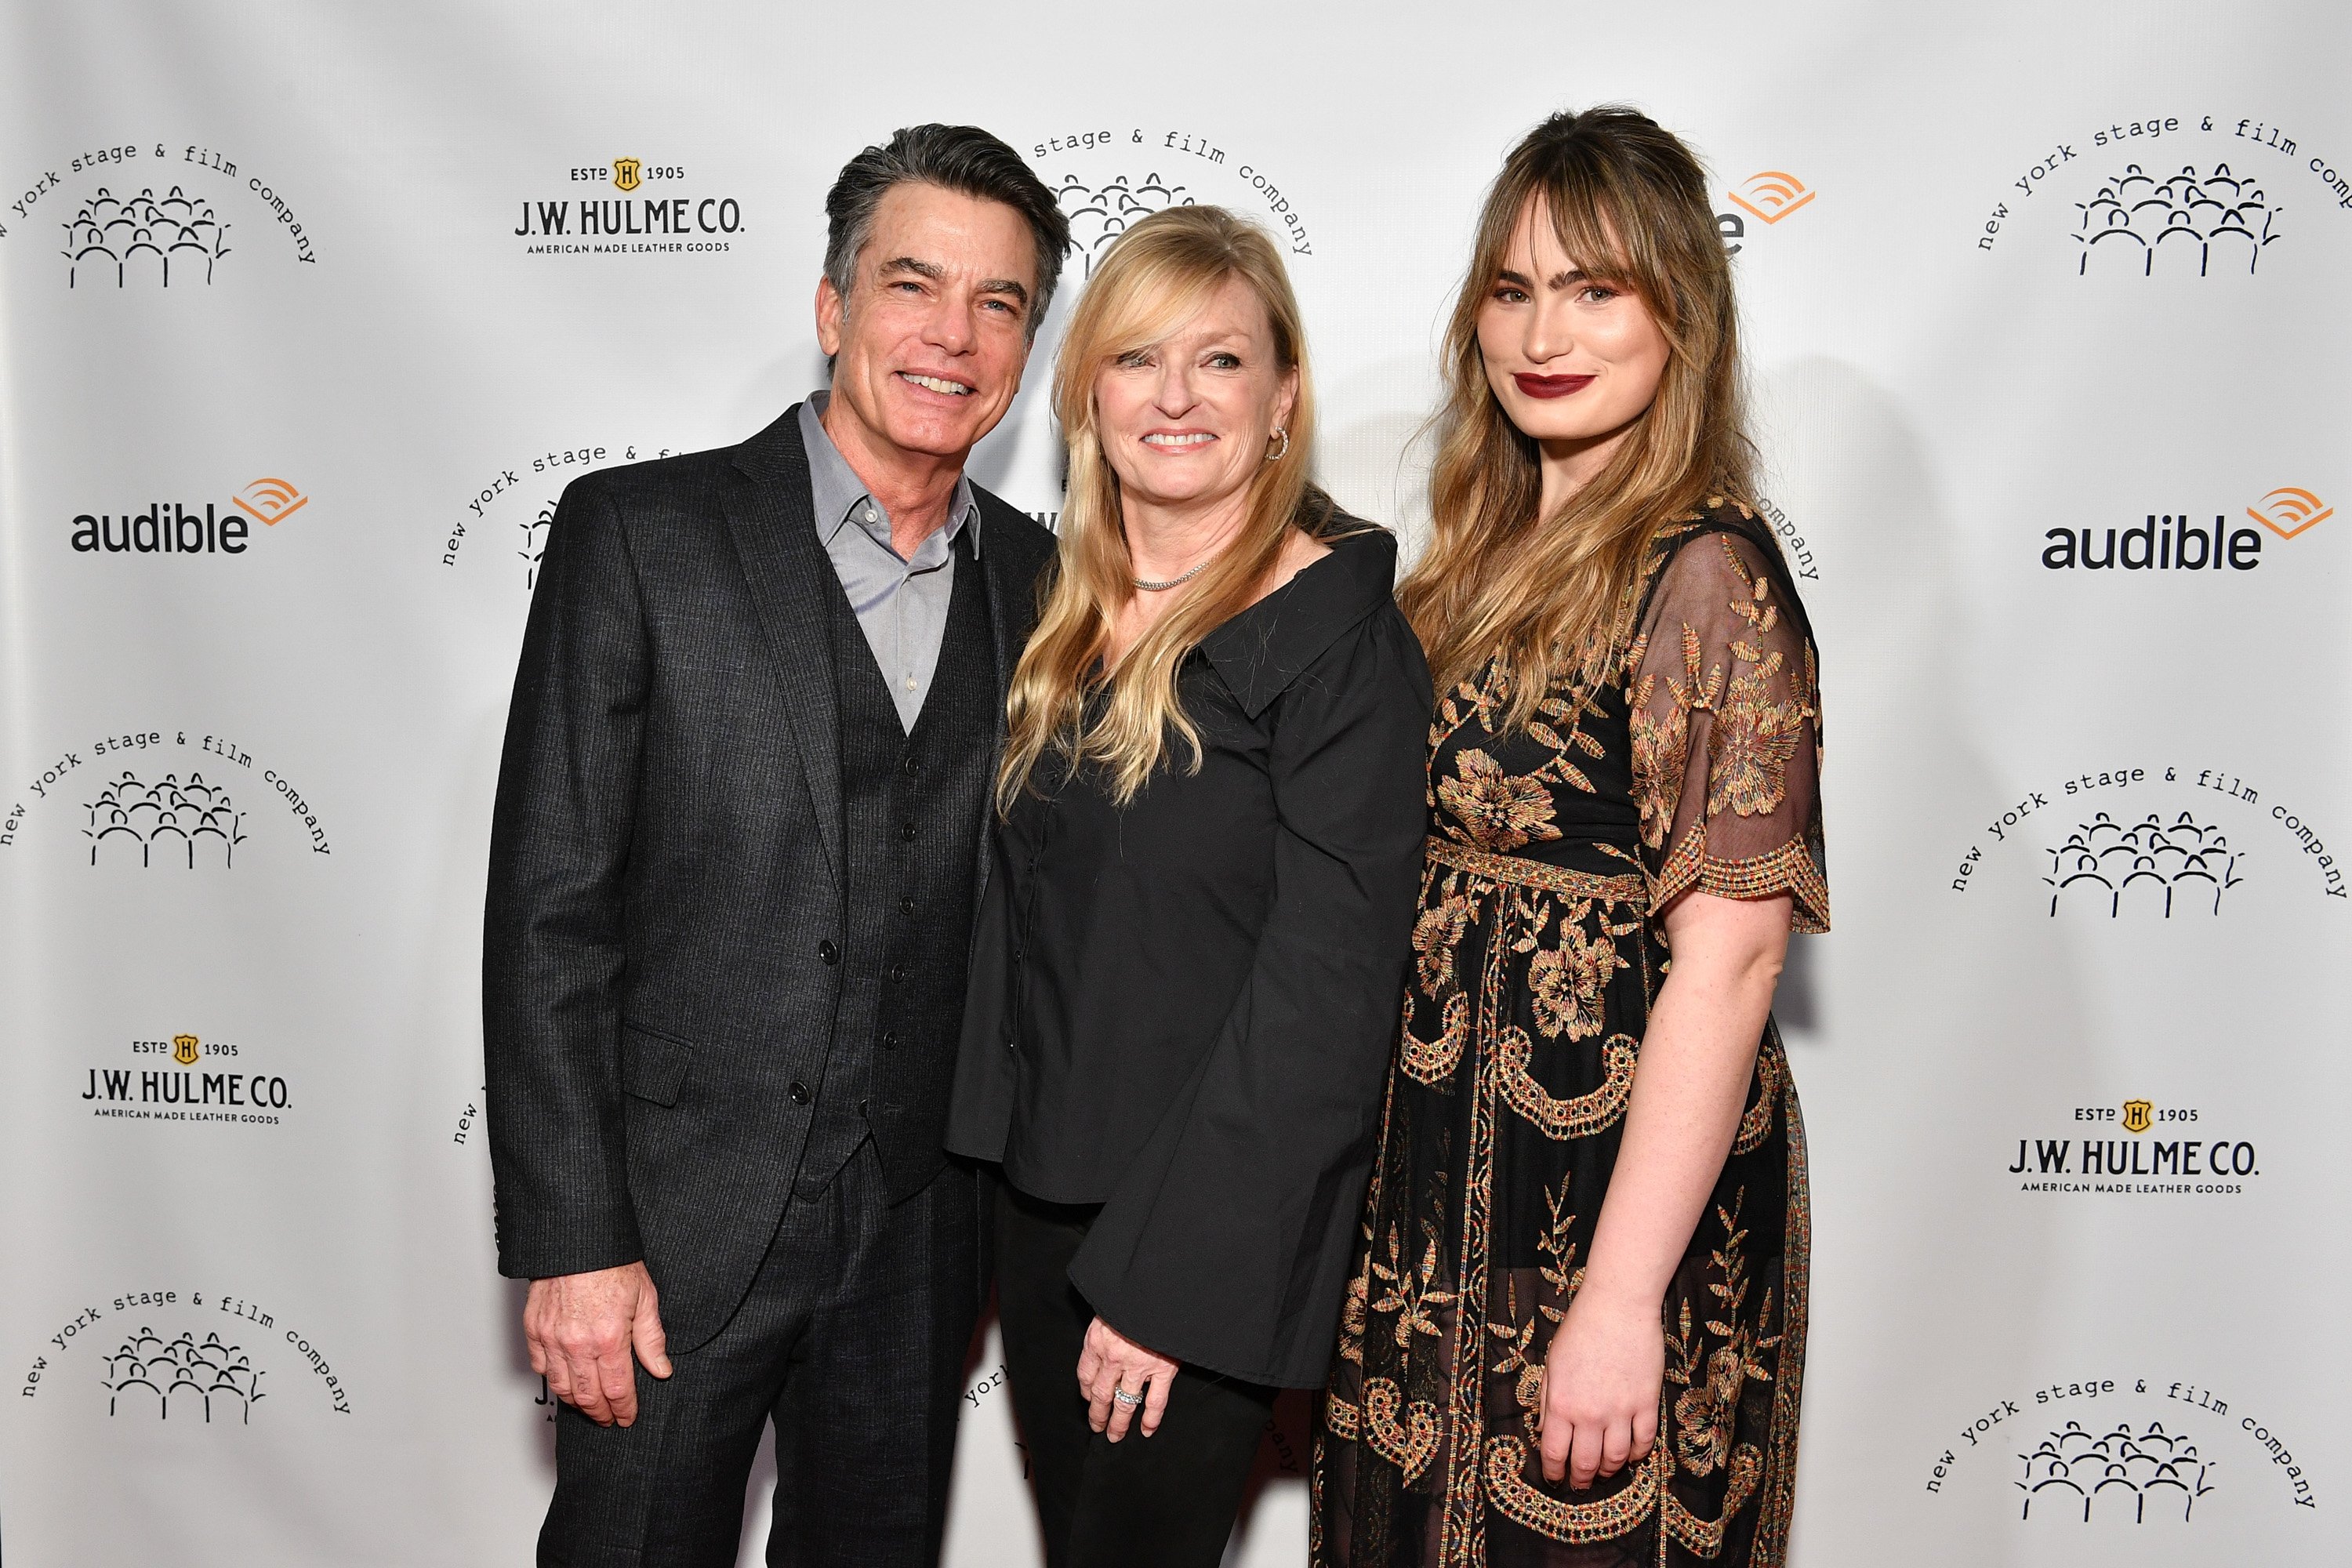 Peter Gallagher, Paula Harwood, and Kathryn Gallagher, at the 2017 New York Stage & Film Winter Gala, hosted at Chelsea Piers in New York City, on December 5, 2017. | Source: Getty Images